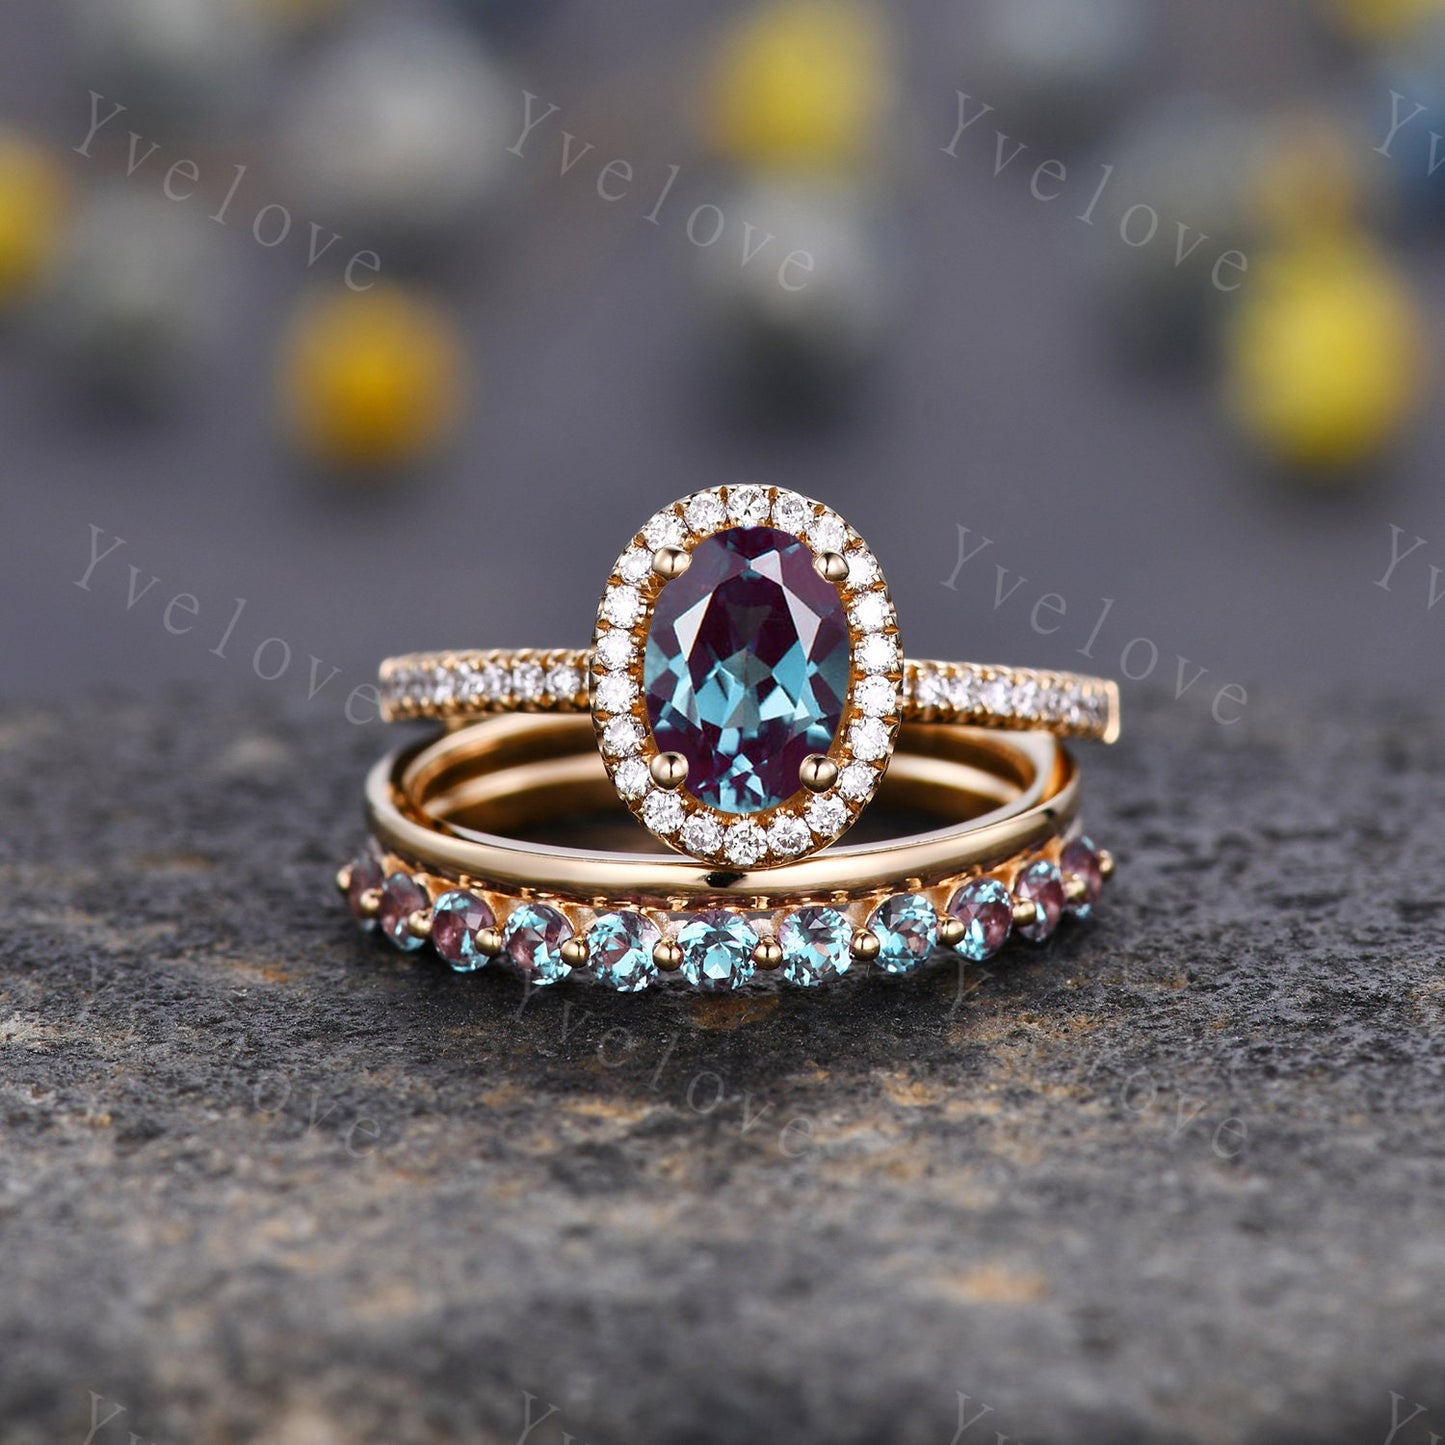 Unique Alexandrite Ring,Plain Band,14K Yellow Gold Women Antique Ring,Wedding Band,Vintage Stacking Matching Ring,Bridal Ring Gift For Her